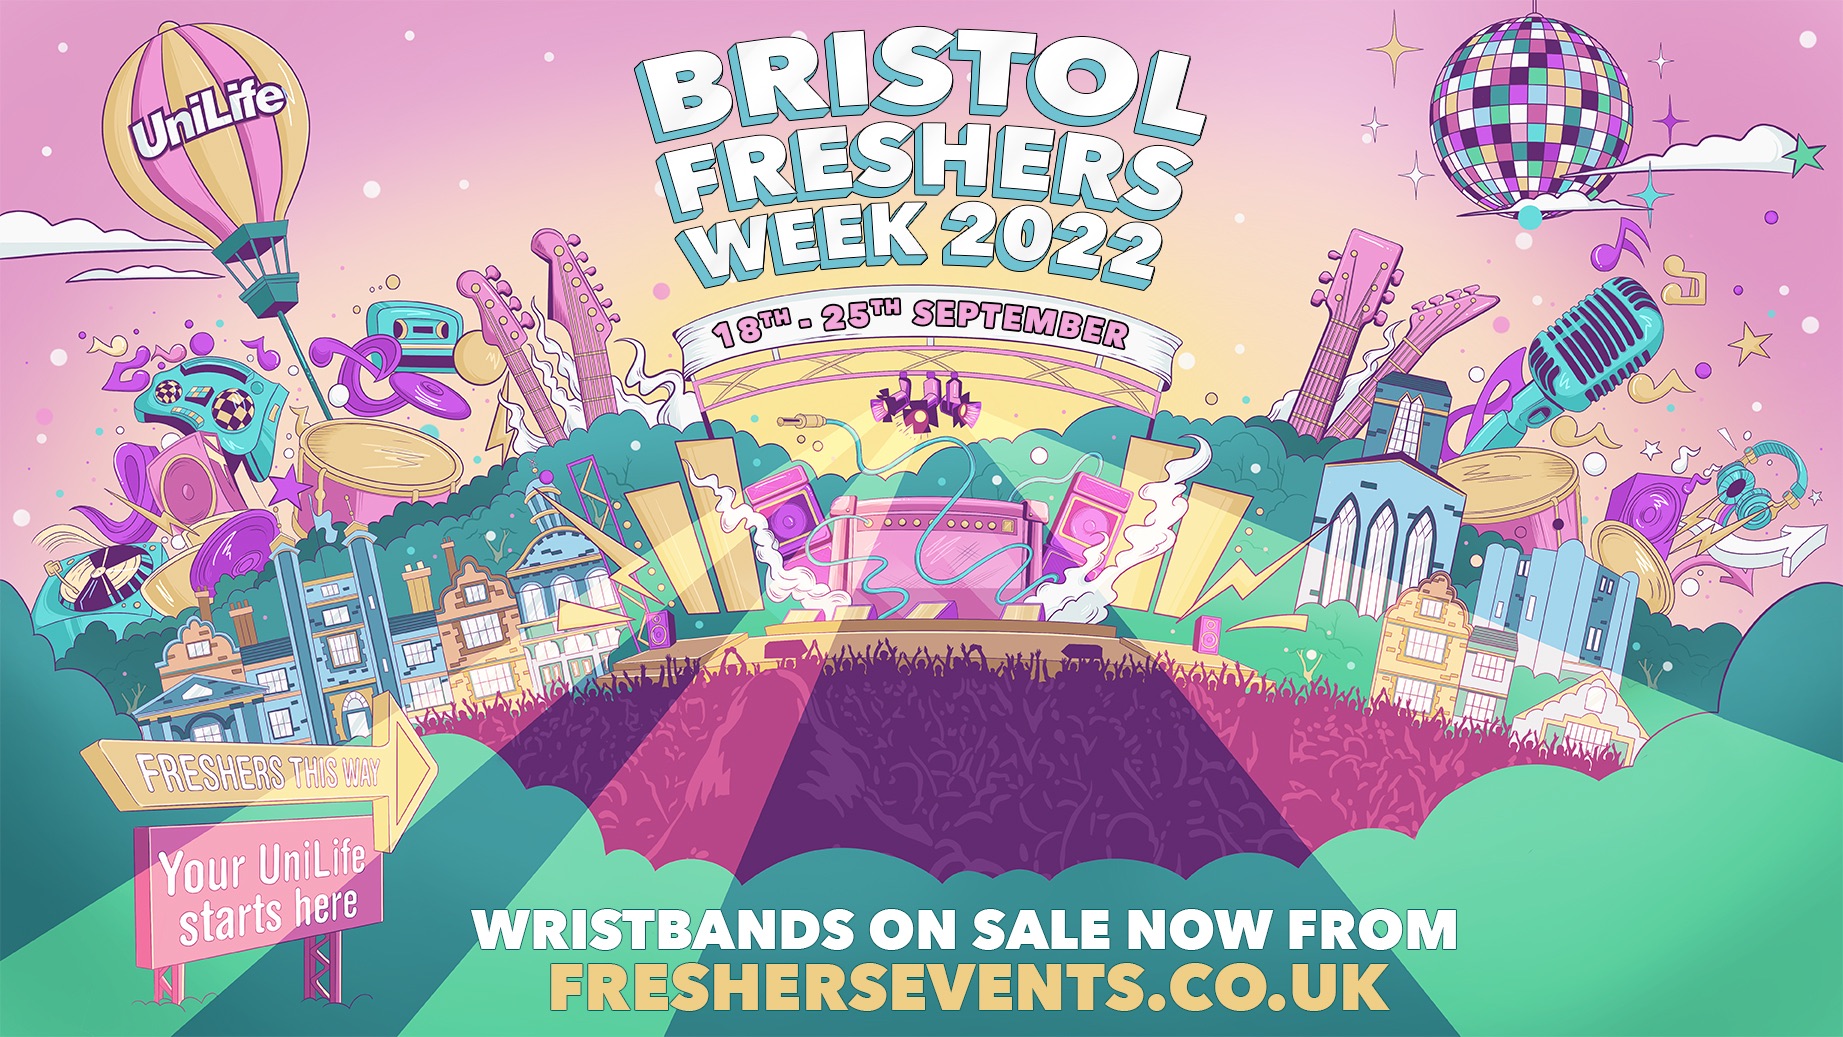 Bristol Freshers Week 2022 First 100 Wristbands only £10 at Multiple